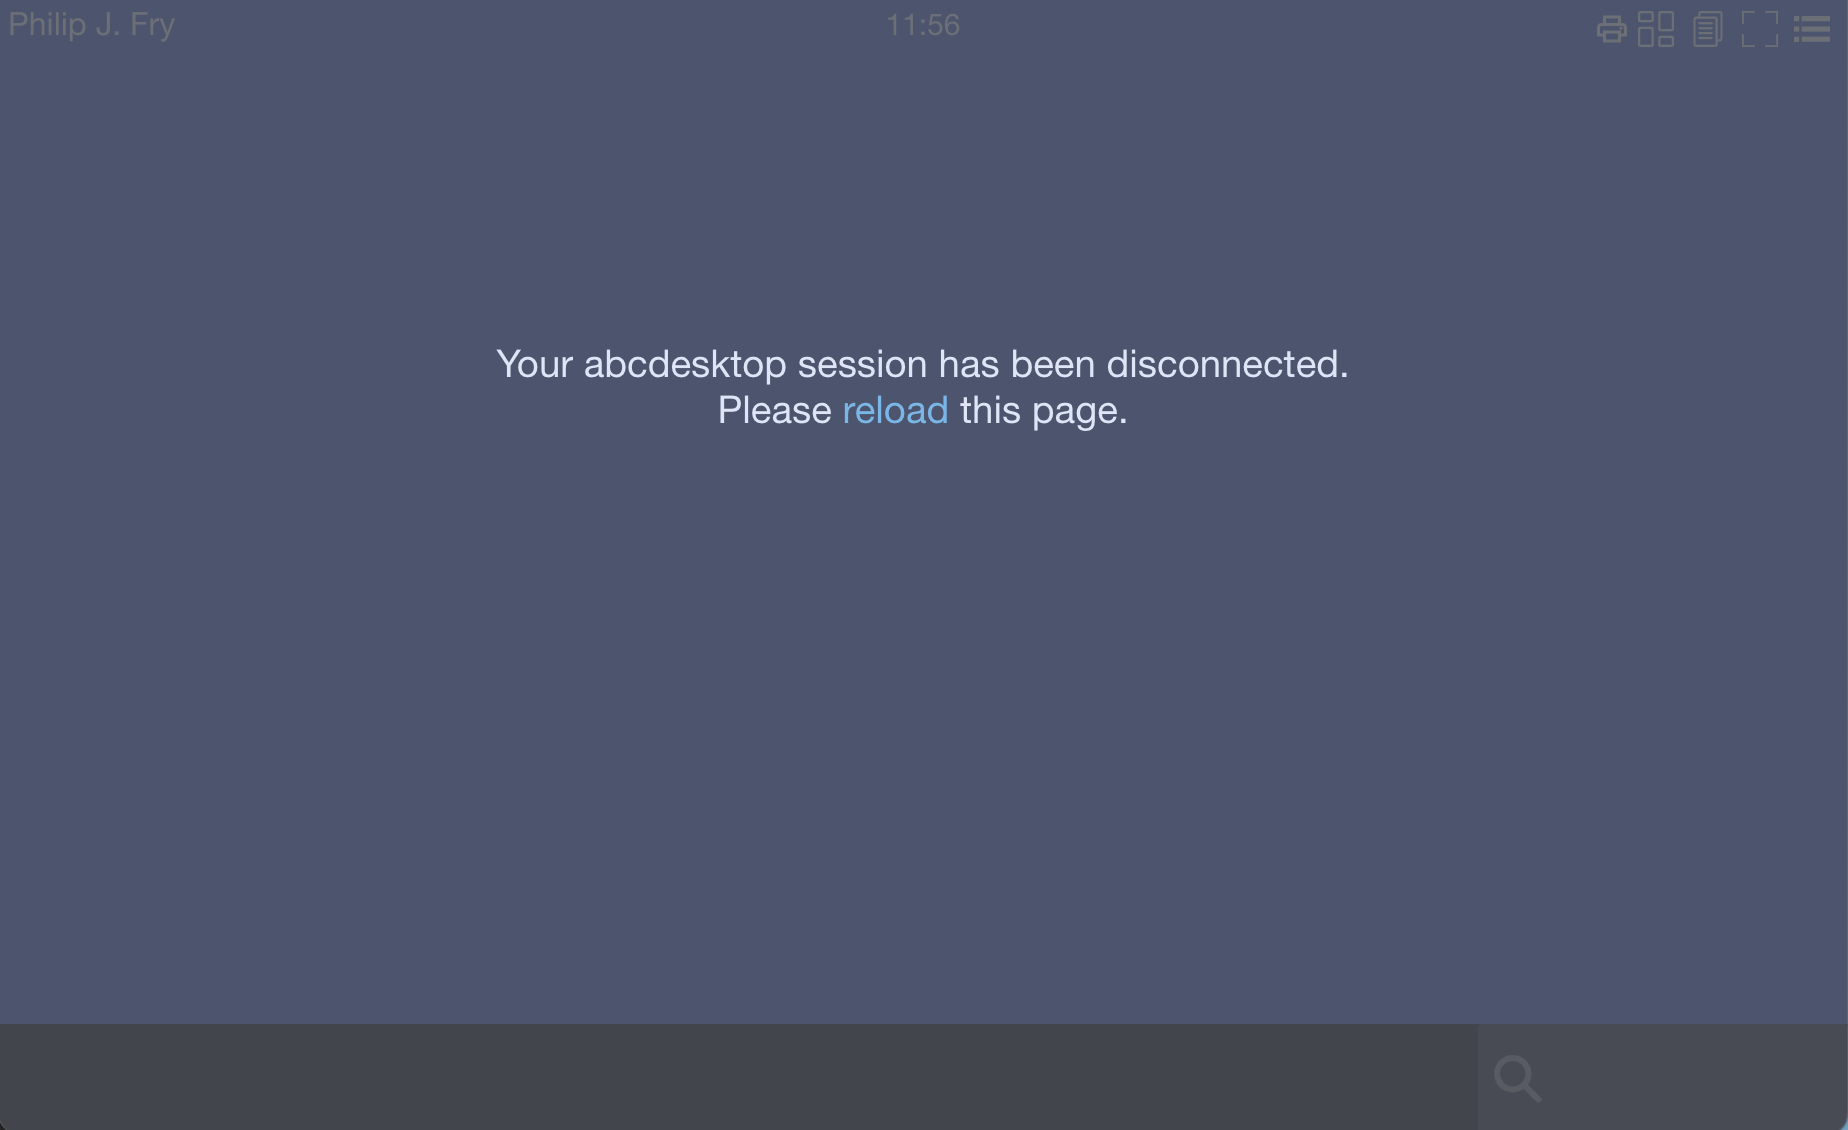 abcdesktop session has been disconnected